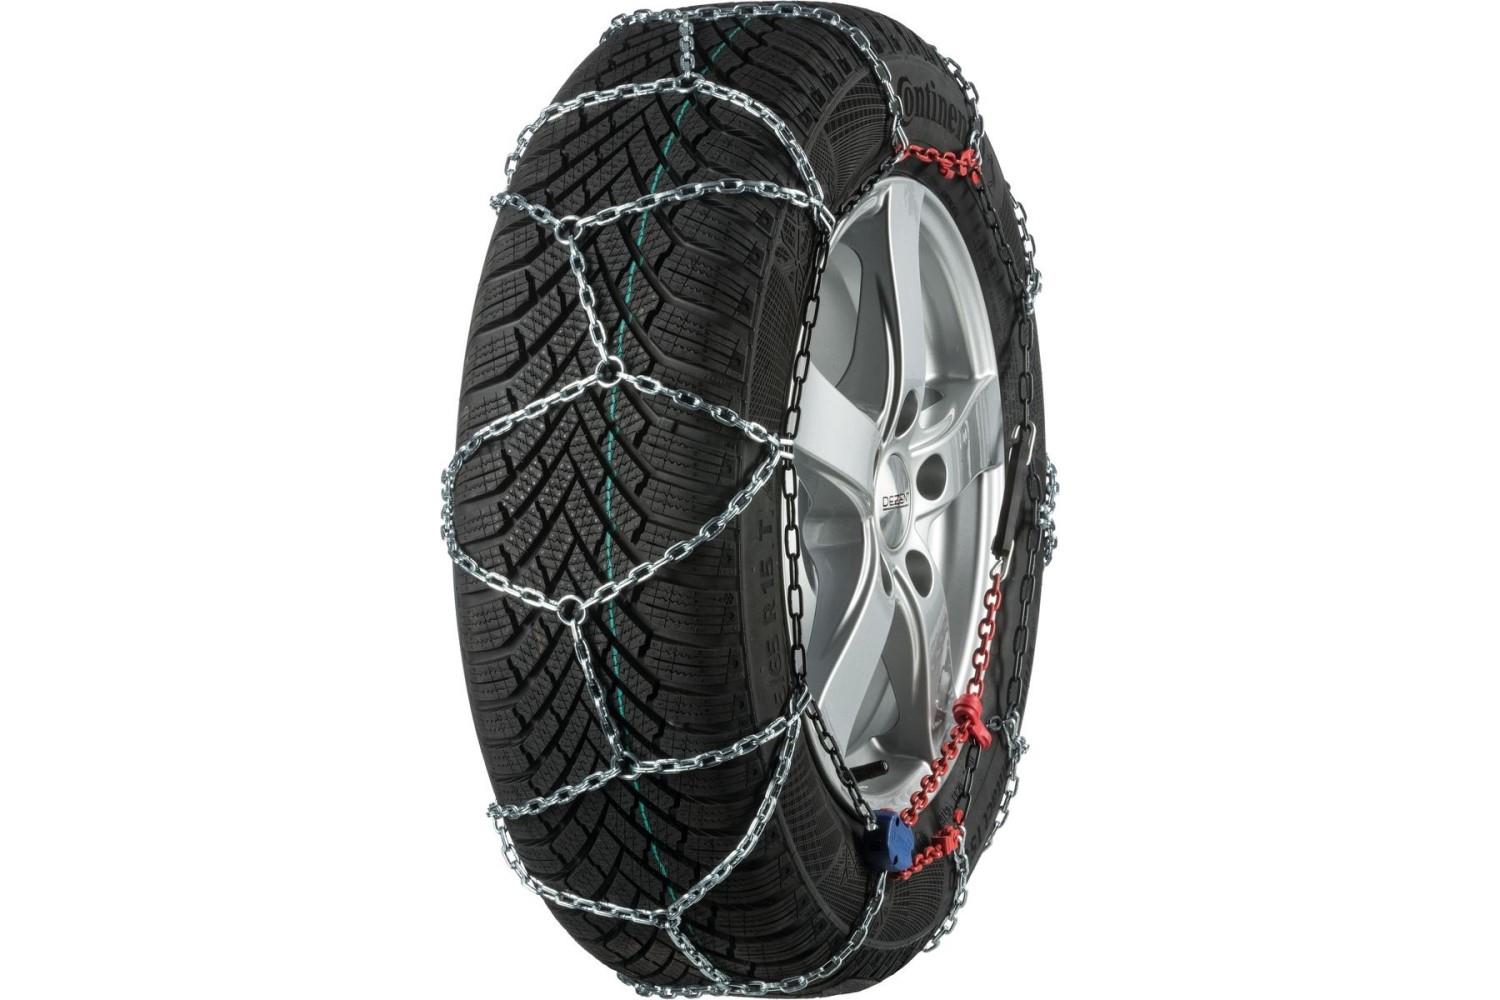 Snow chains 155/65 R15 - Pewag Nordic Star N 62 ST - set of 2 pieces